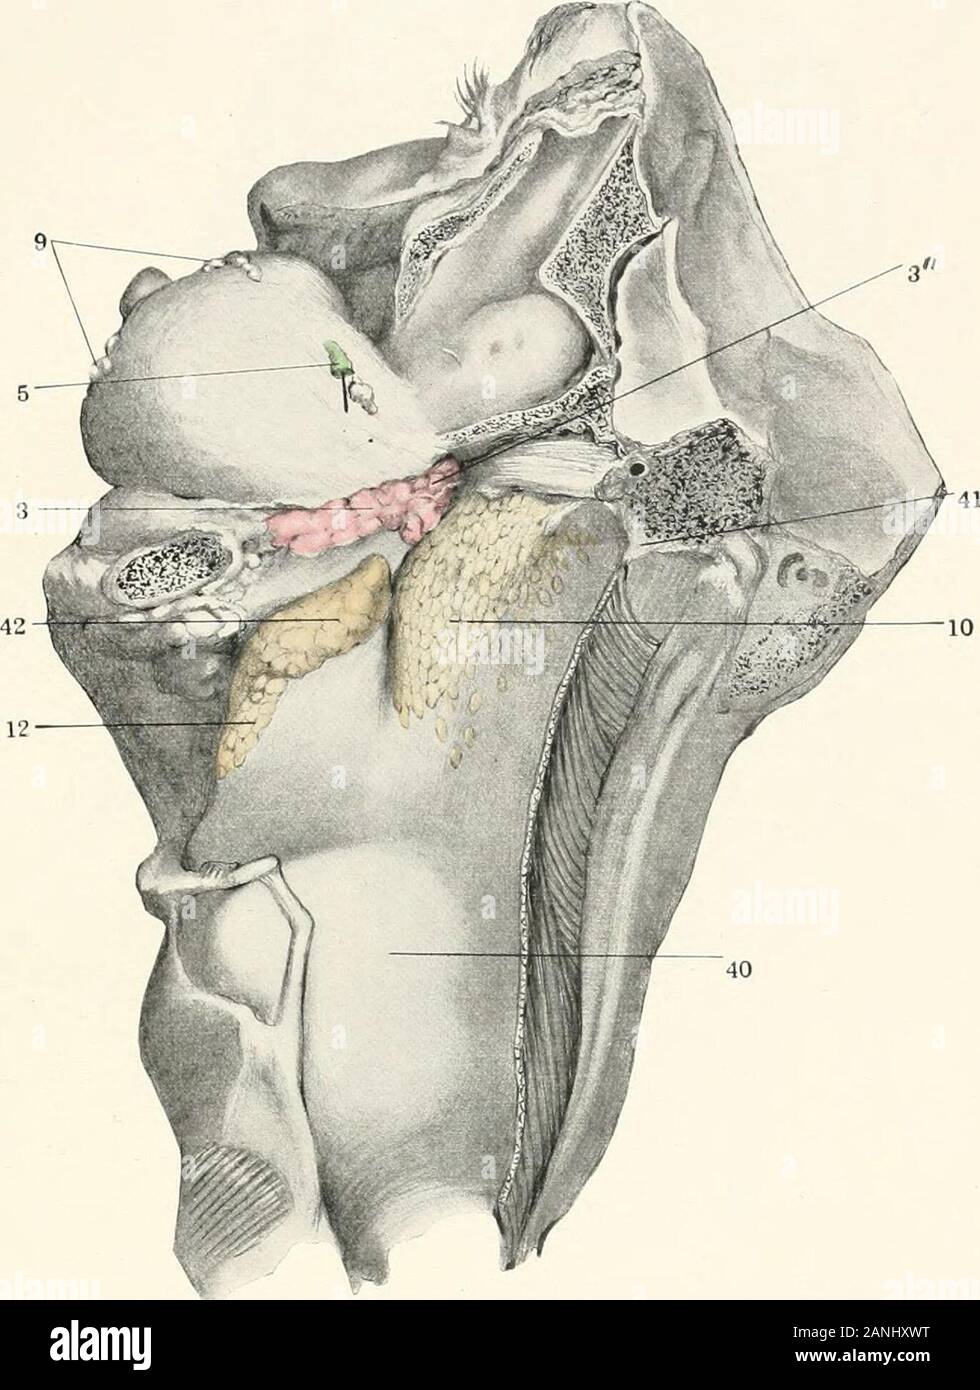 Contributions to the anatomy and development of the salivary glands in the mammalia . Plate IX Fig. 20. Human adult. Dorsolateral view of tonsil, peritonsillar, isthmian, pala-tine, and pharyngeal glands. The mouth and pharynx are distendedby a preliminary hardening injection. Columbia University Morpho-logical Museum, No. 2140. j. Isthmian glands, j. Palatine glands. 5. Parotid duct. 9. Labial glands. /(). Pharyngeal glands. 12. Peritonsillar lymphoid foUicles. 4(1. Pharynx. 41. Pharyngeal tubercle. 42. Tonsil. PLATE IX.. Fig. 20. Plate X Fig. 21. Ventral view of same preparation. g. Labial g Stock Photo